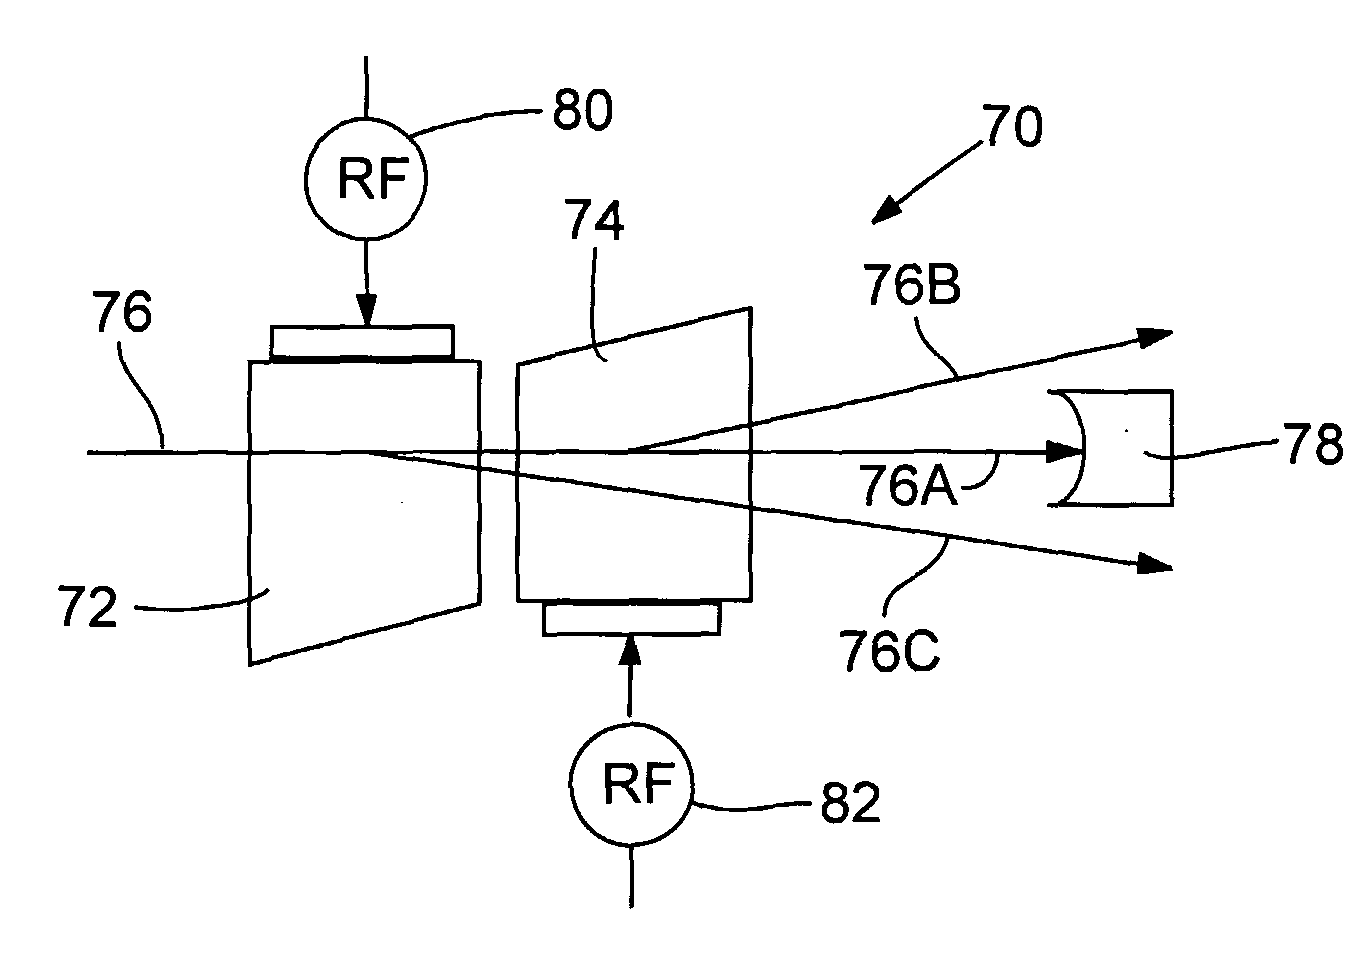 Laser constructed with multiple output couplers to generate multiple output beams